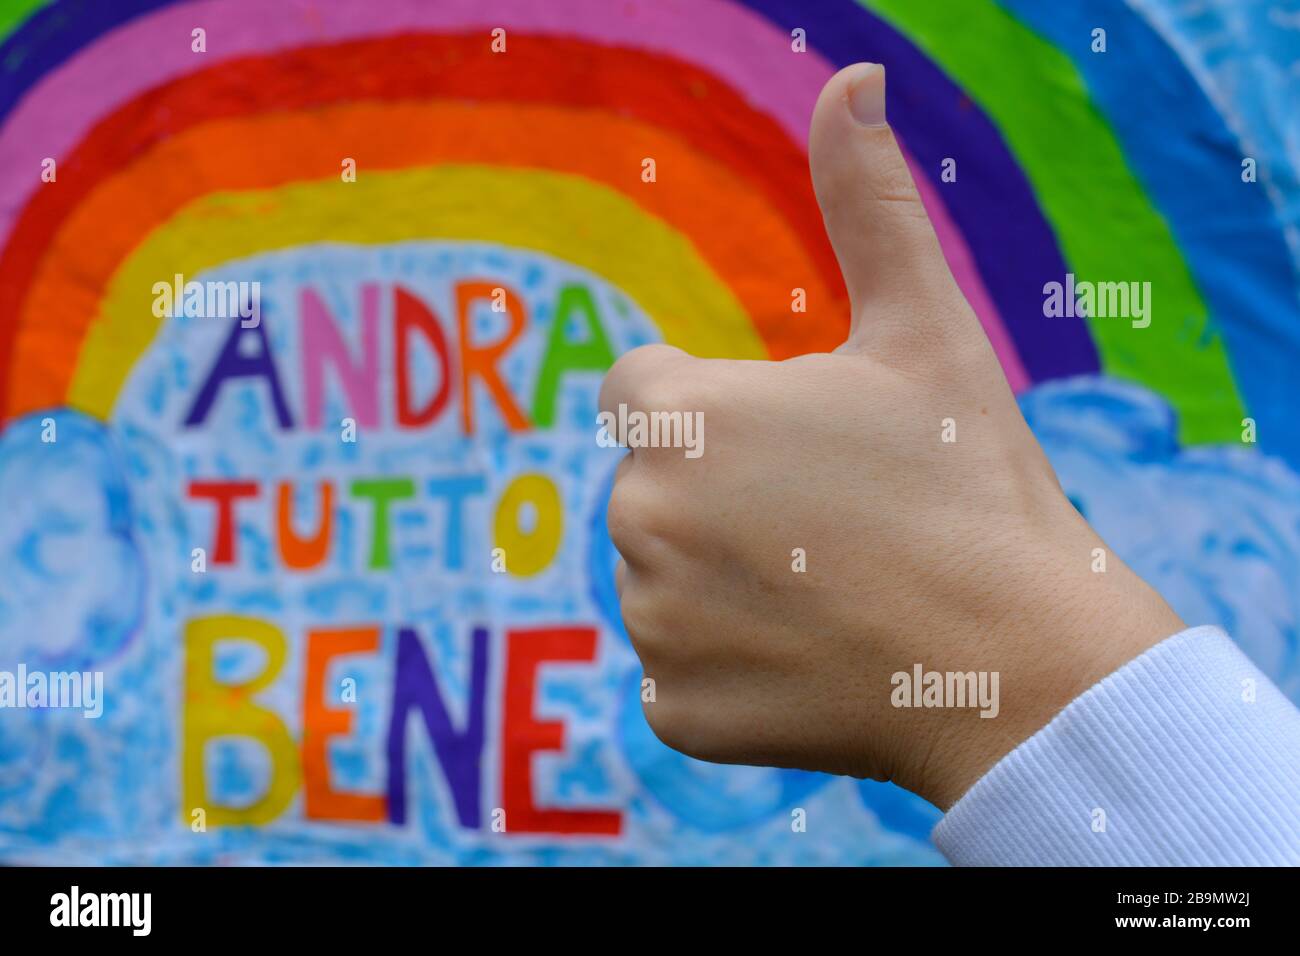 Positive message on banner translates in Everything will be alright.Close-up of a fist and sign of thumbs-up.Symbols in pandemic in Italy encouragemen Stock Photo